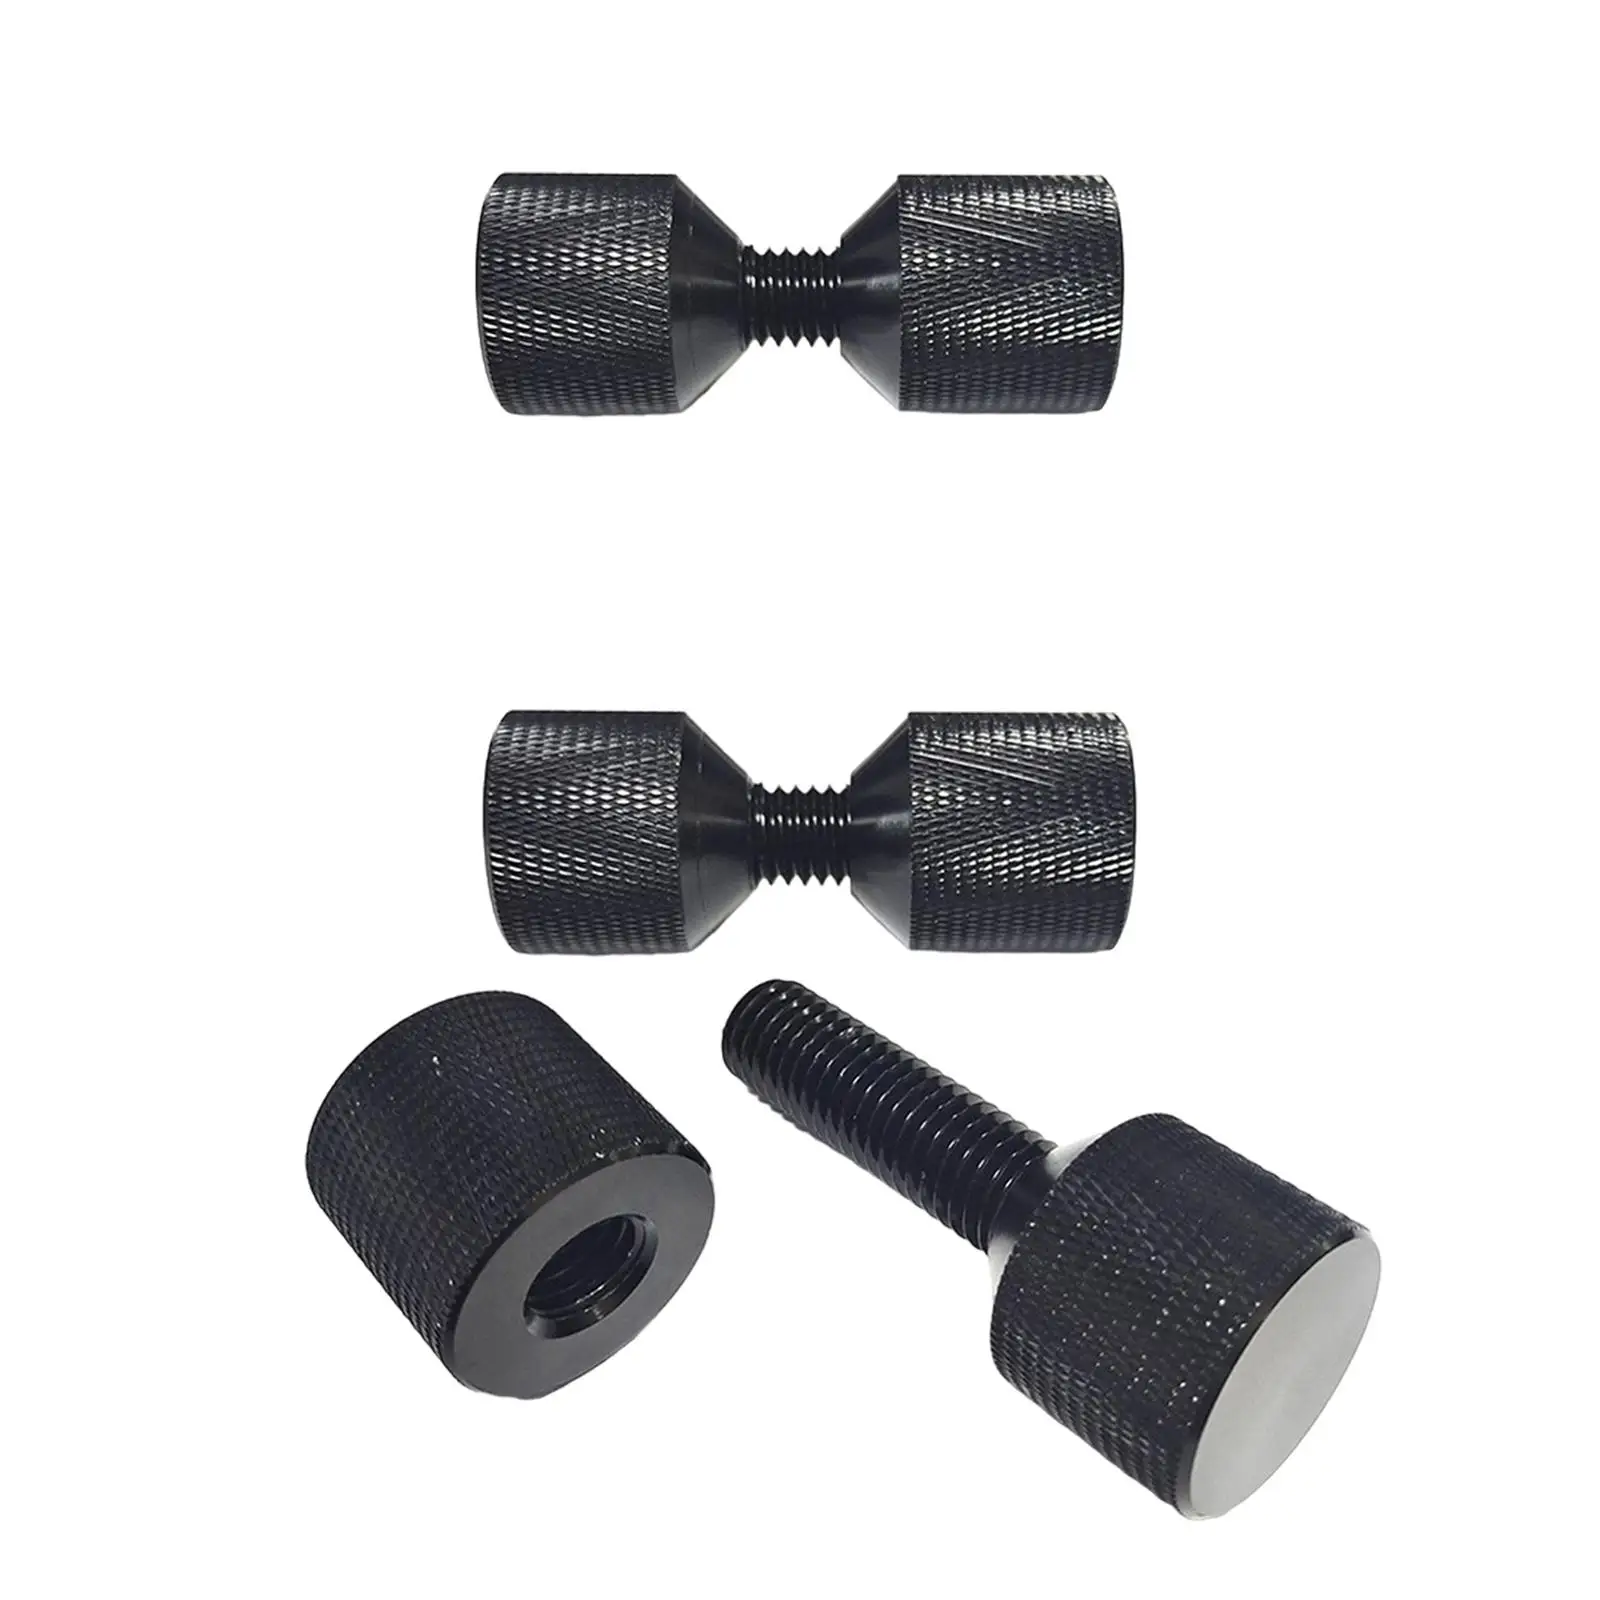 

1-1/8" Two Hole Flange Alignment Pin Set Sturdy Black Finish Accessories Aluminum for 1/2" Pipe to 12" Level 150 Flanges